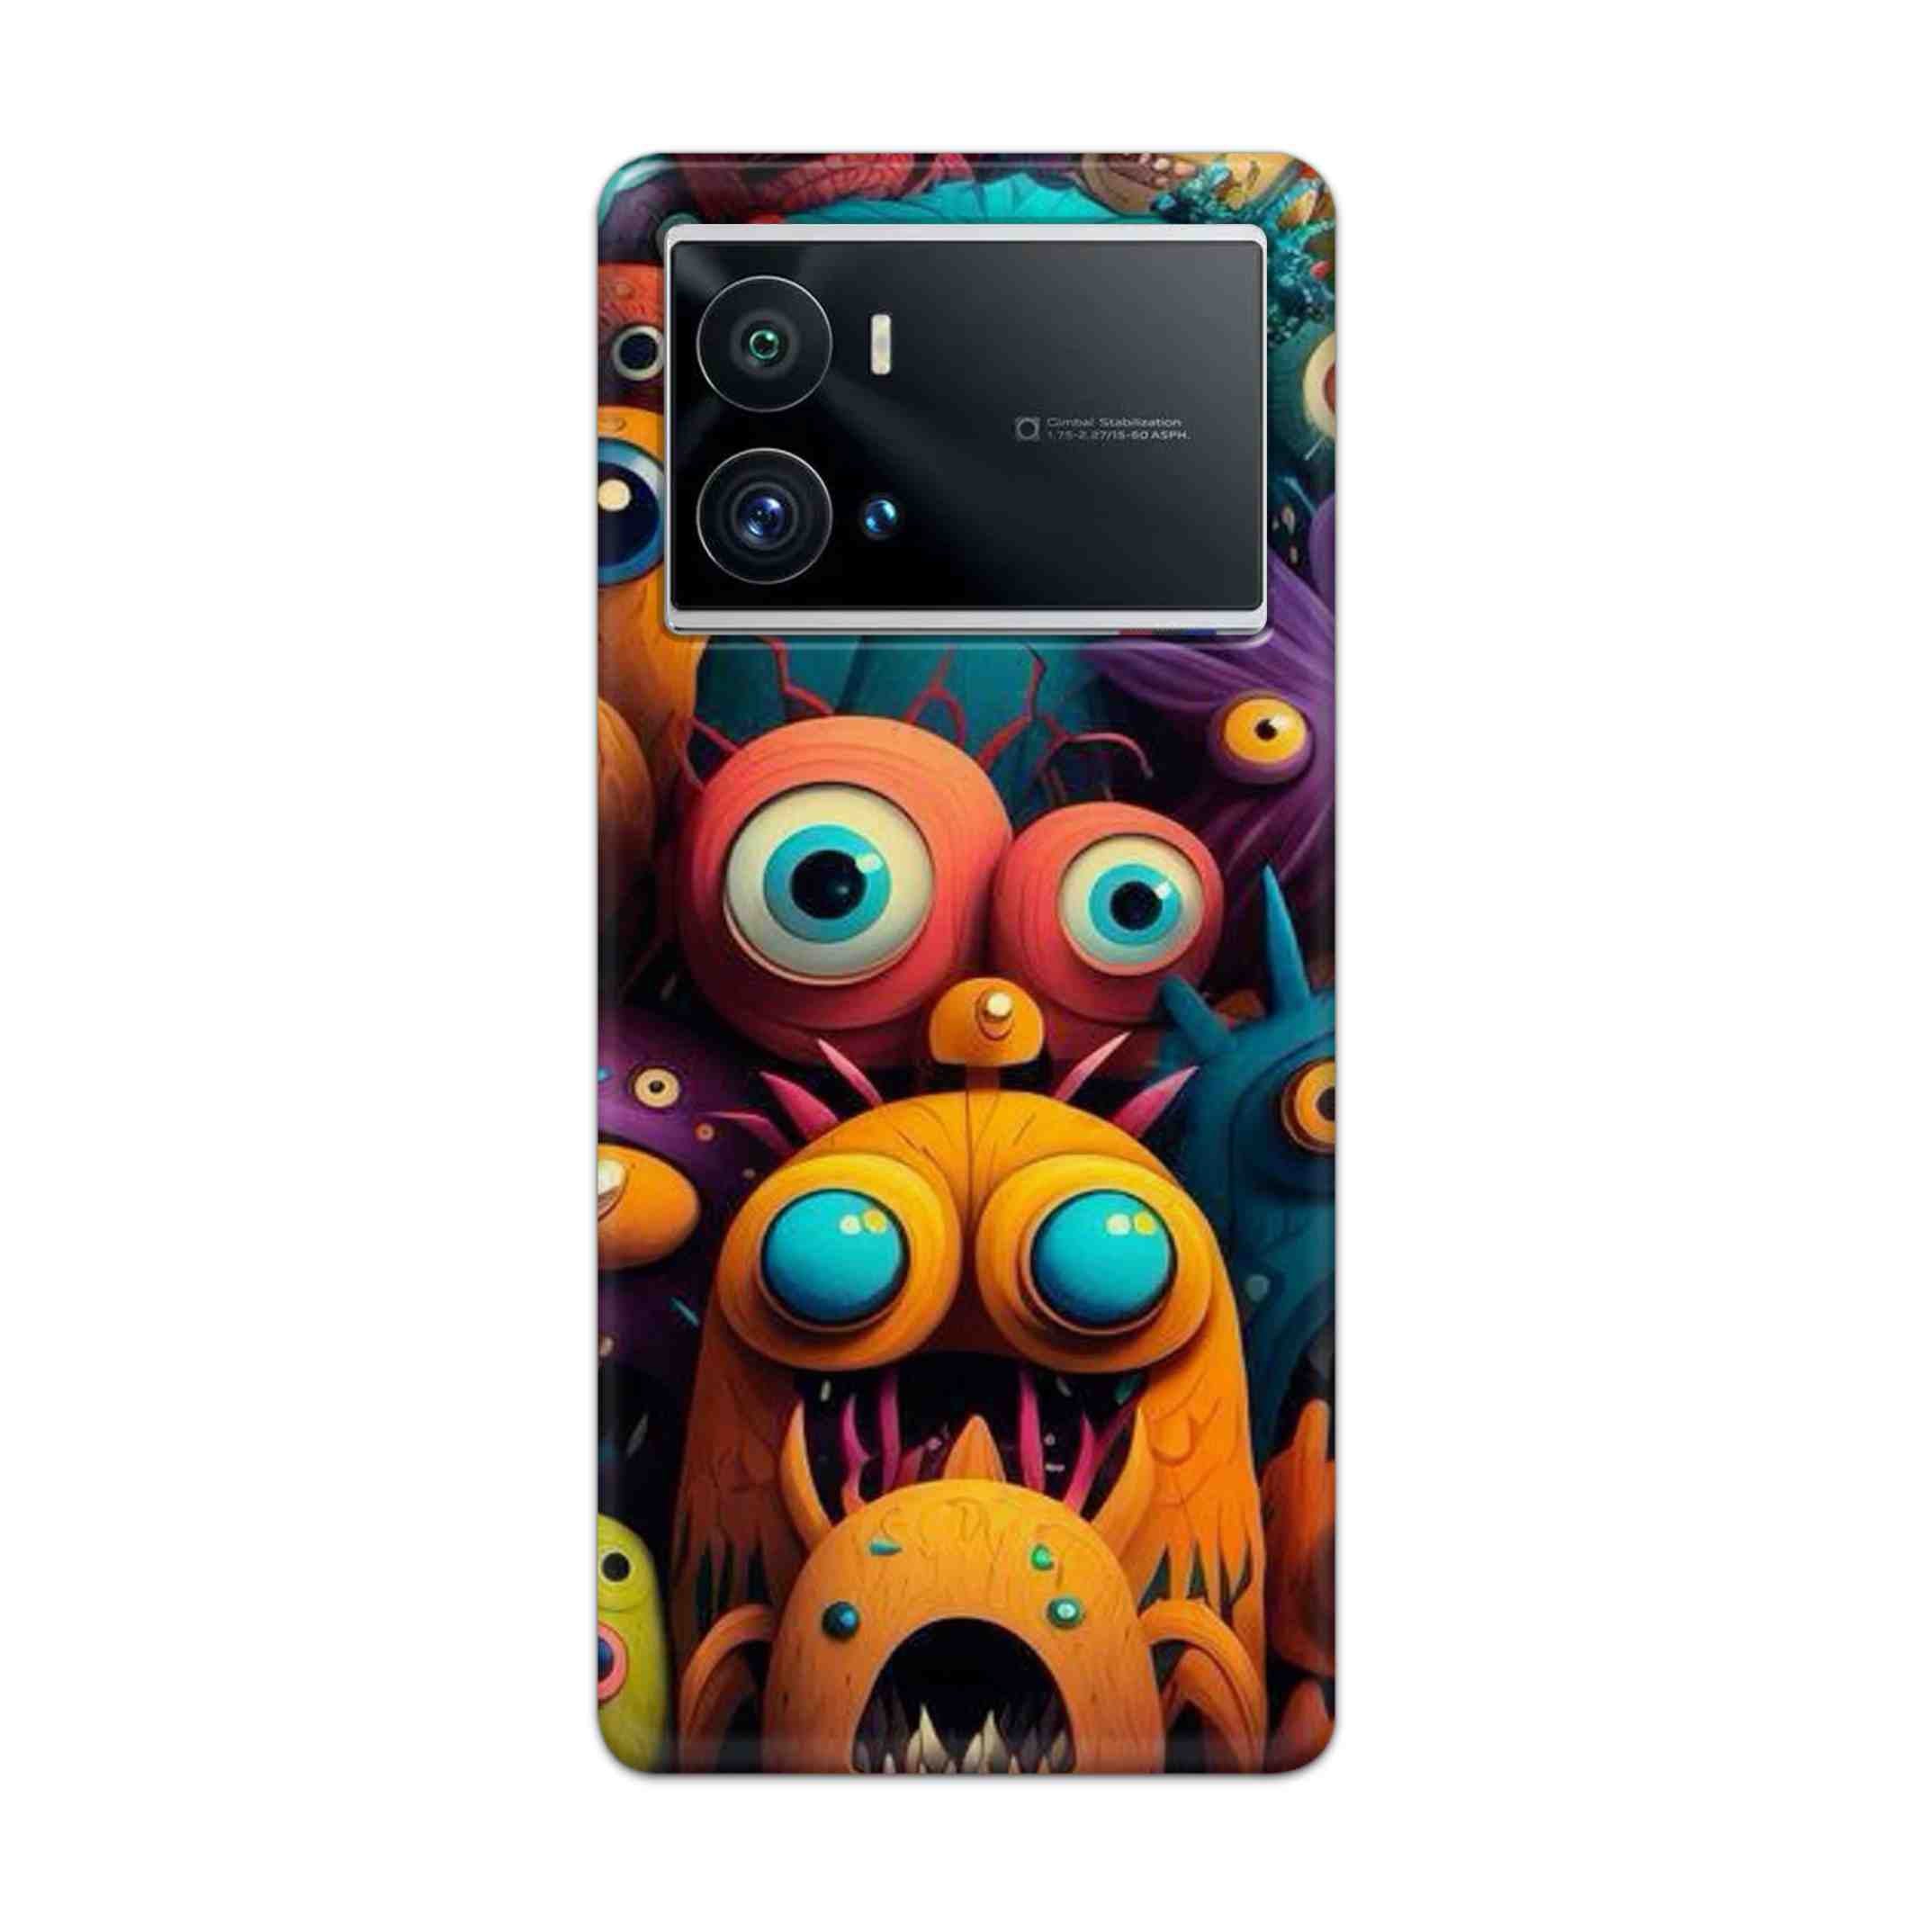 Buy Zombie Hard Back Mobile Phone Case Cover For iQOO 9 Pro 5G Online